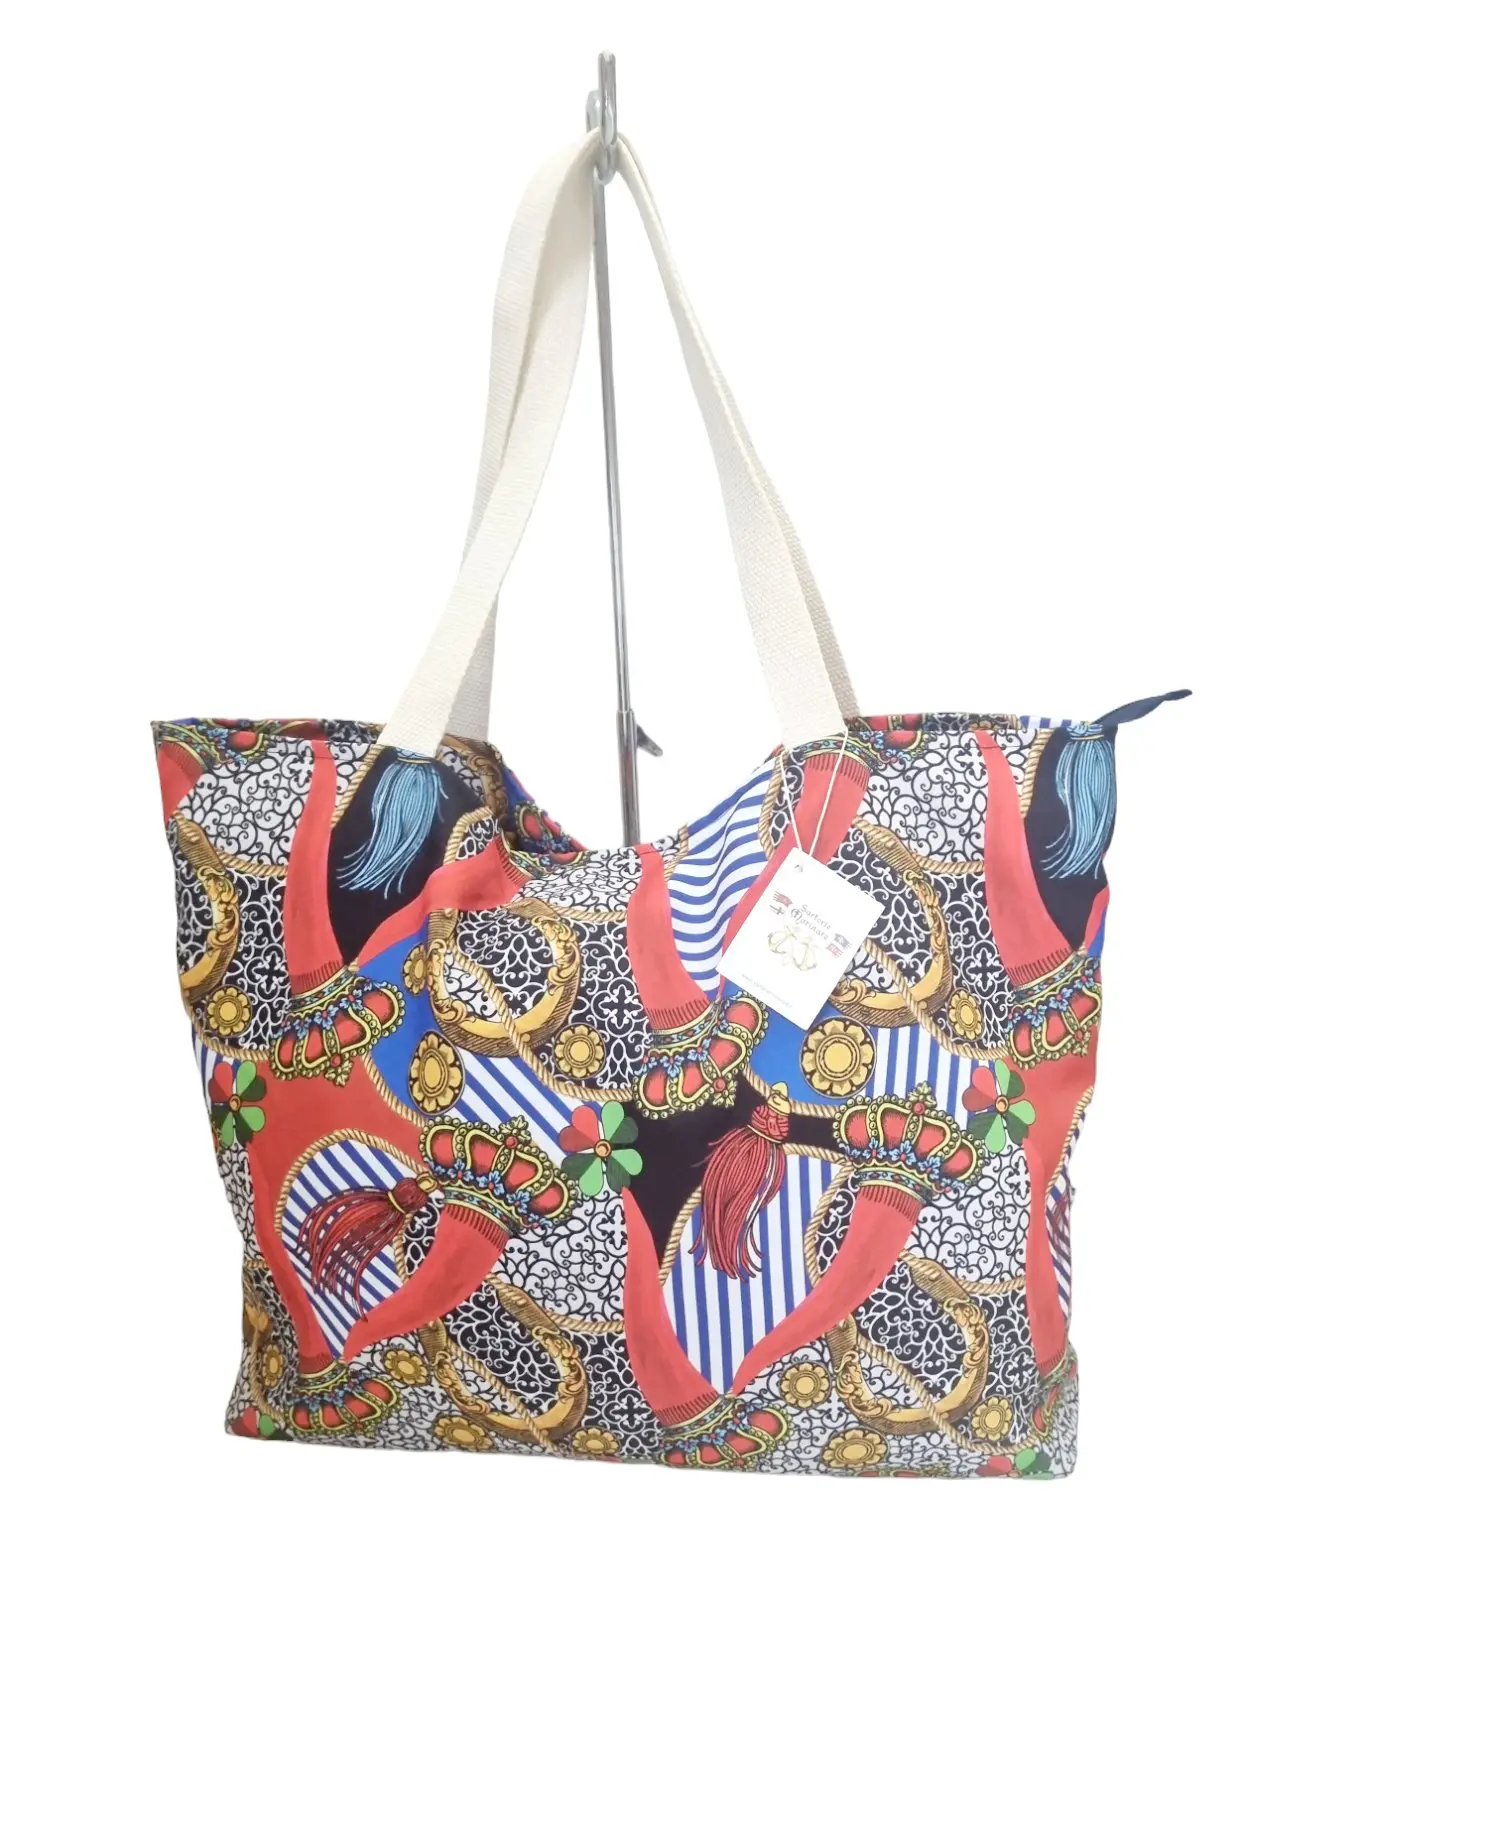 Large Beach Shopper Bag in Polyester with Zip Closure - Horns Pattern - Handmade in Italy